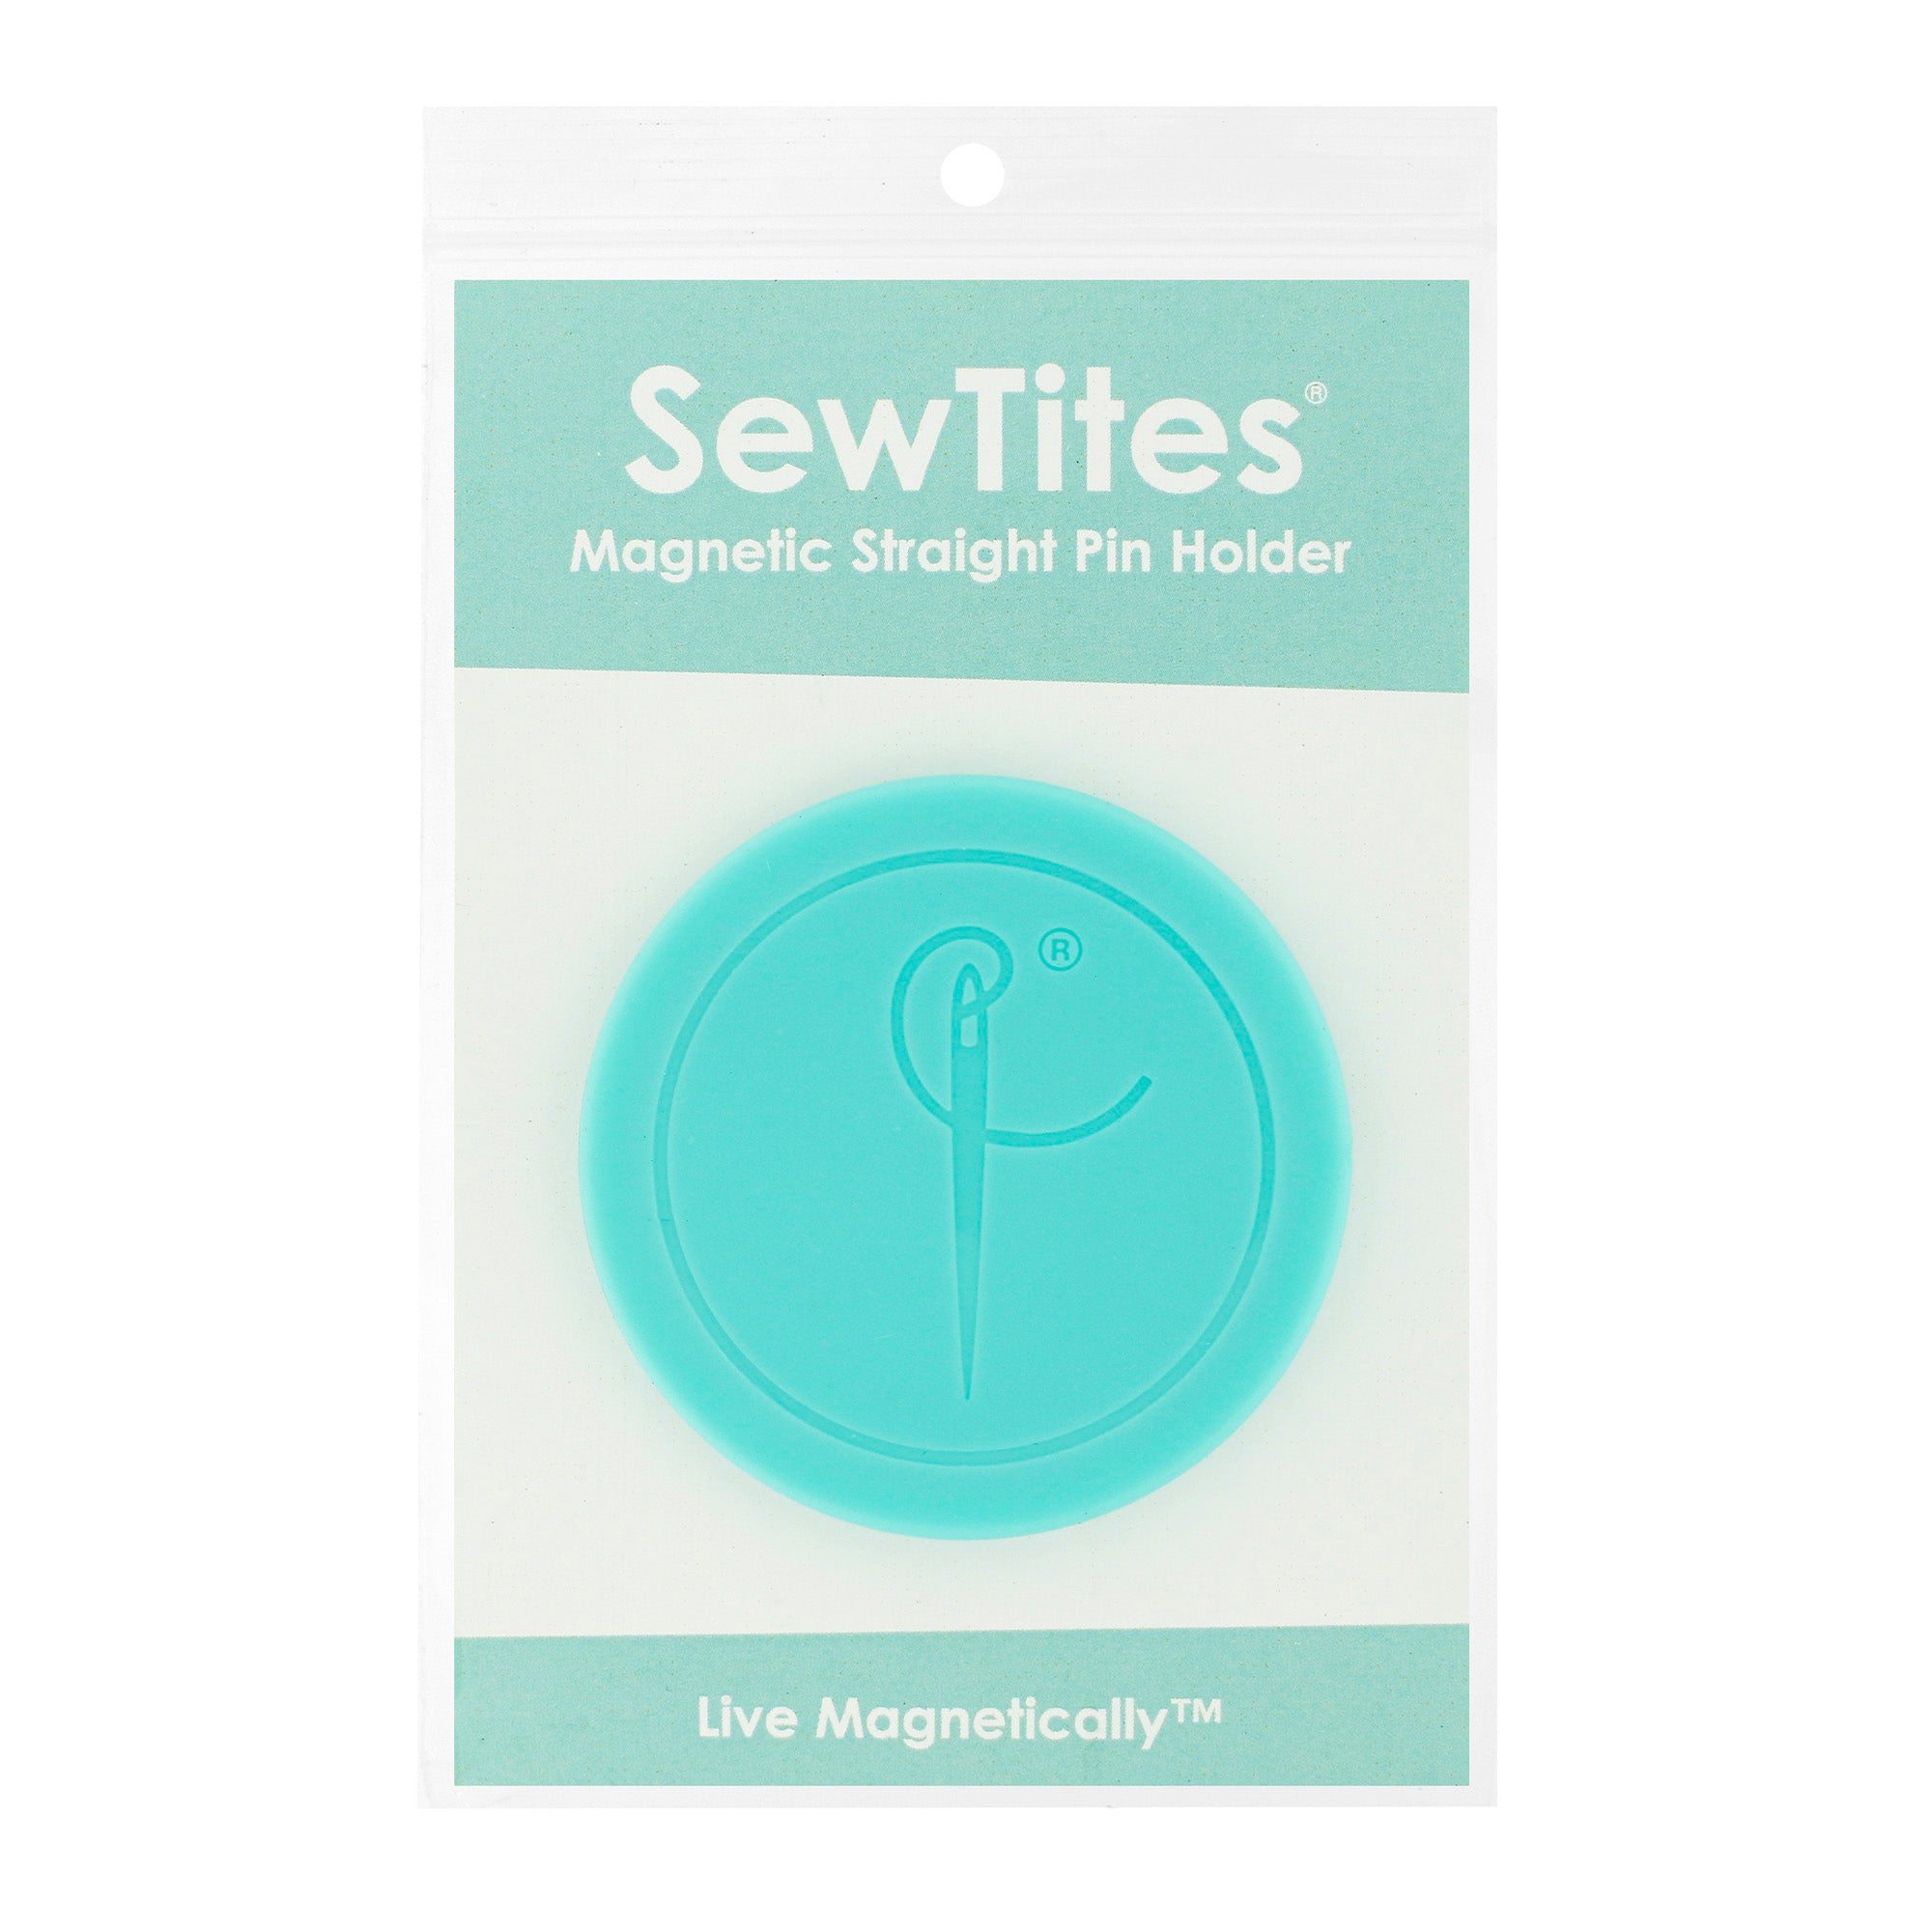 SewTites Wearable Magnetic Straight Pin & Snips Holder